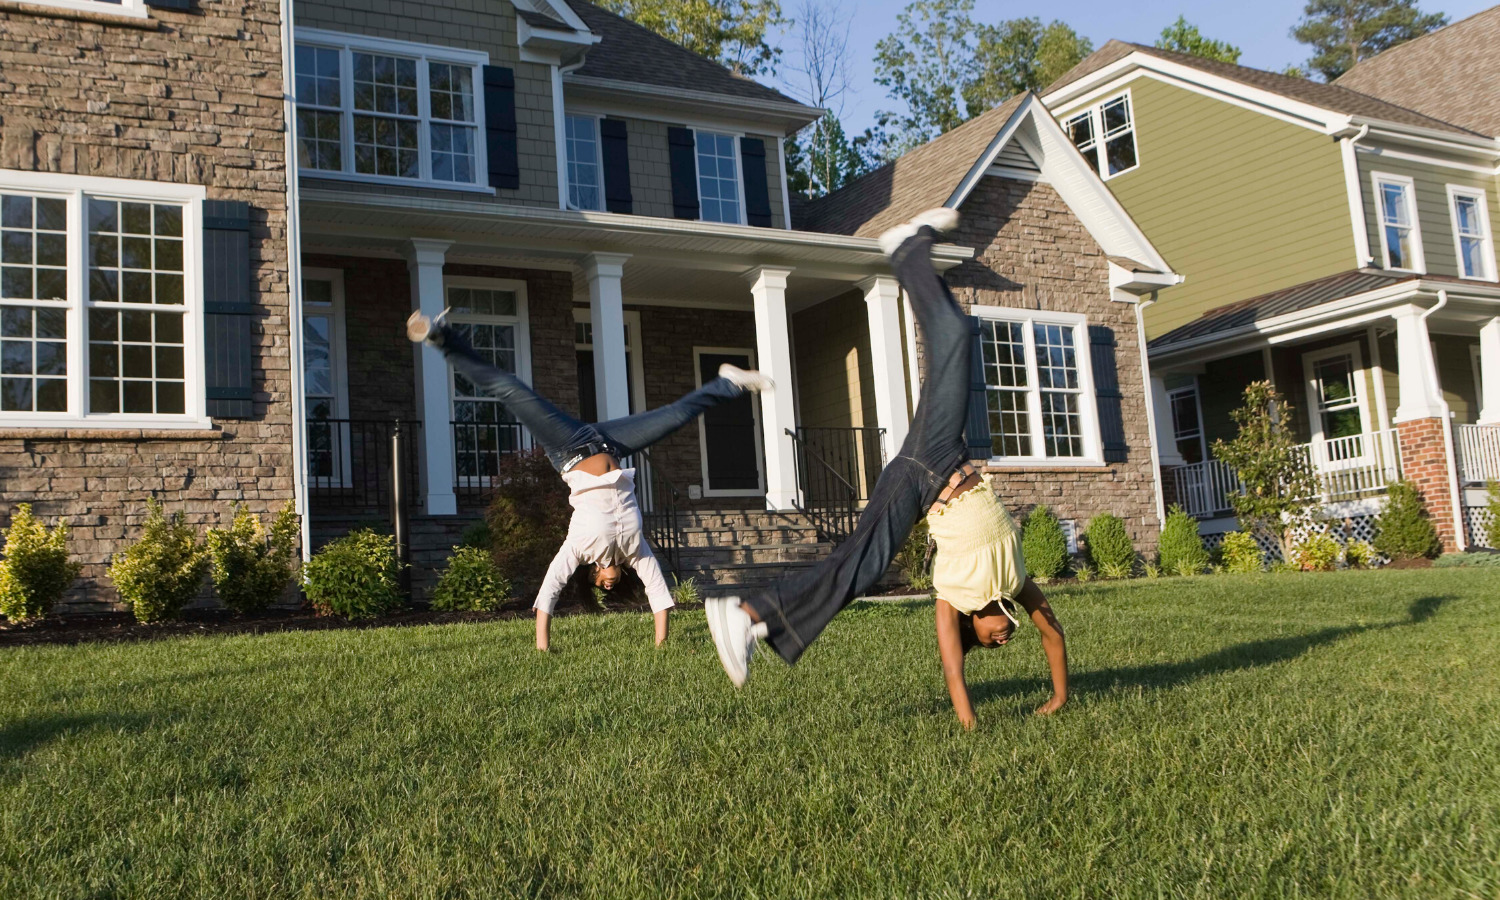 Photo of kids doing cartwheels on the lawn